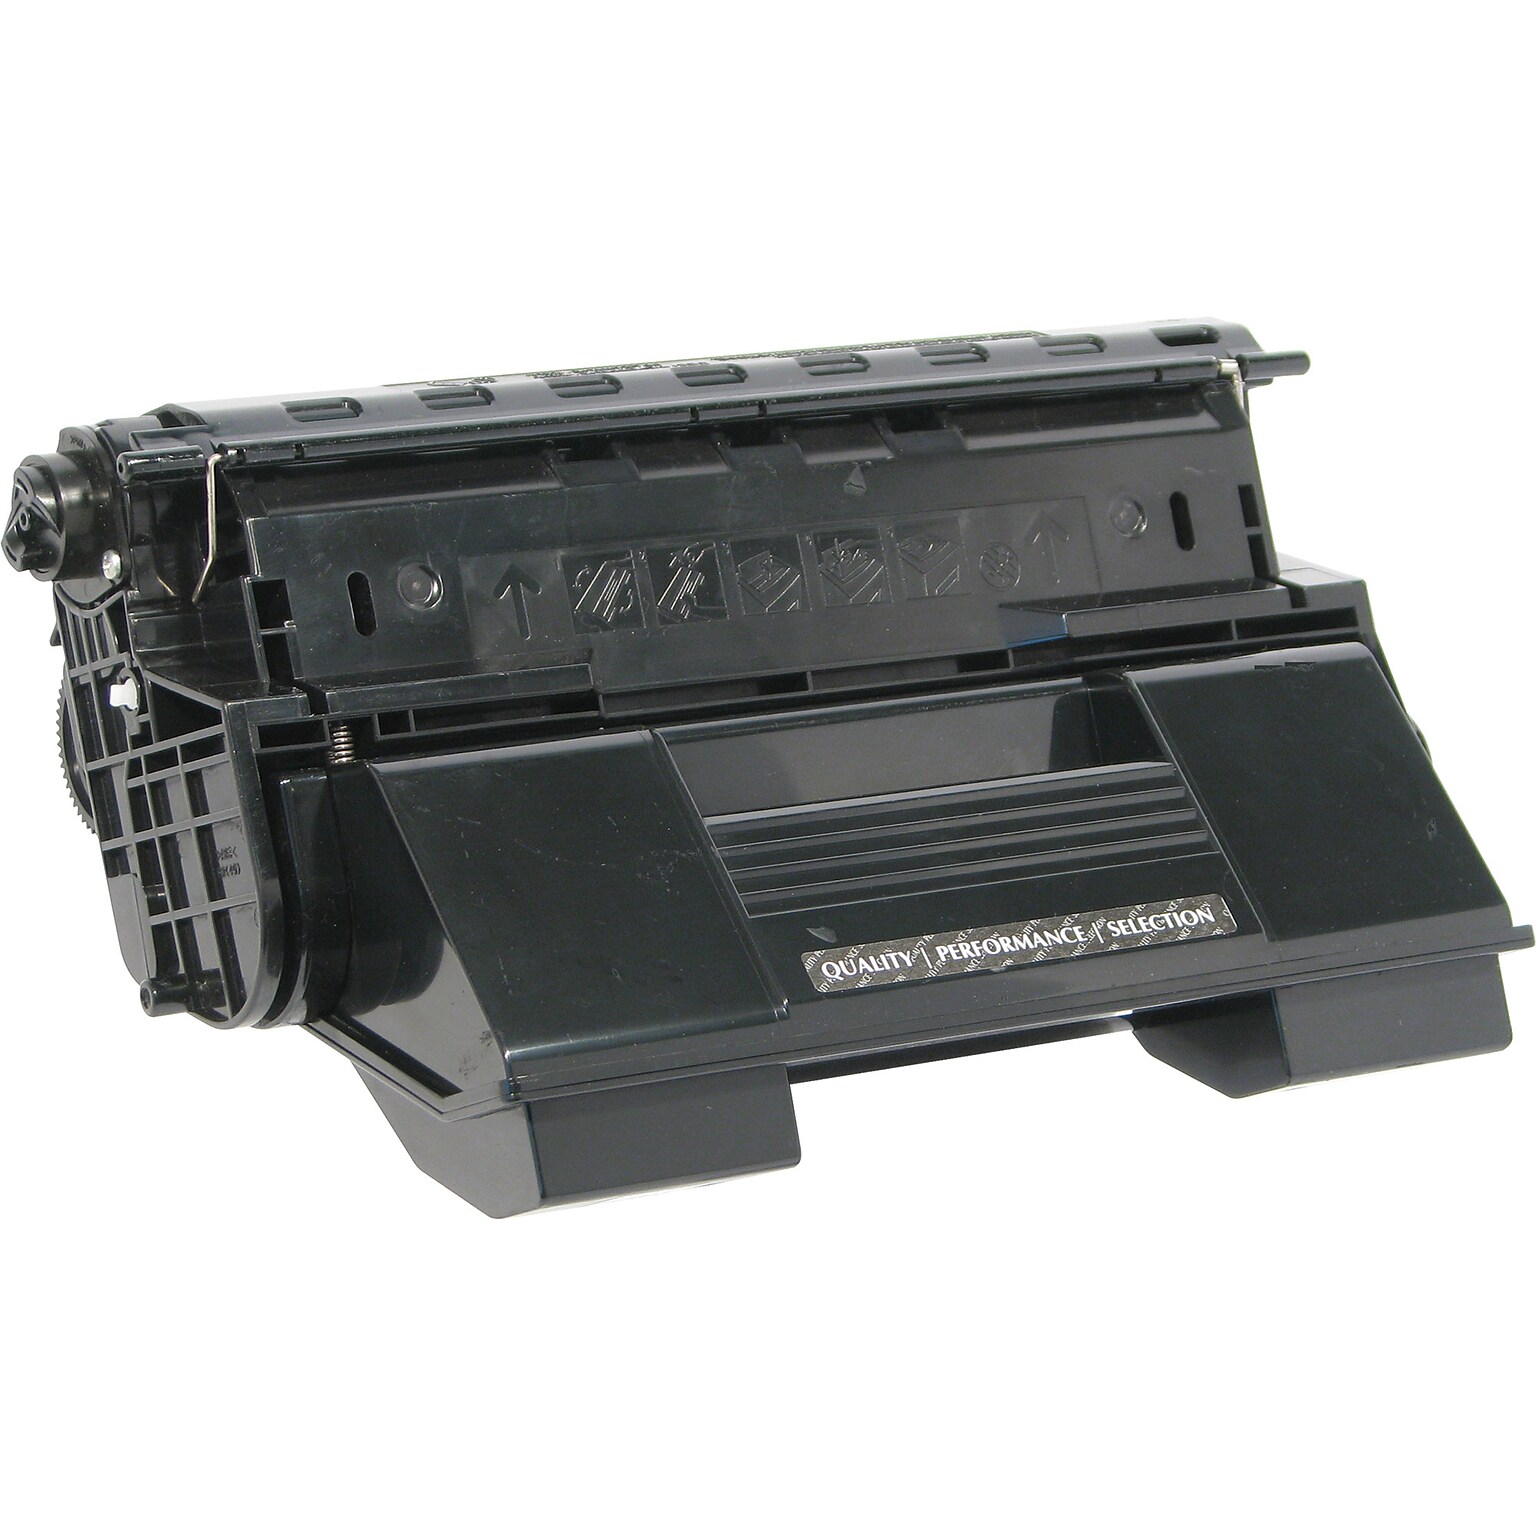 Quill Brand High Yield Toner Cartridge Comparable to Xerox® 113R00712 Black (100% Satisfaction Guaranteed)